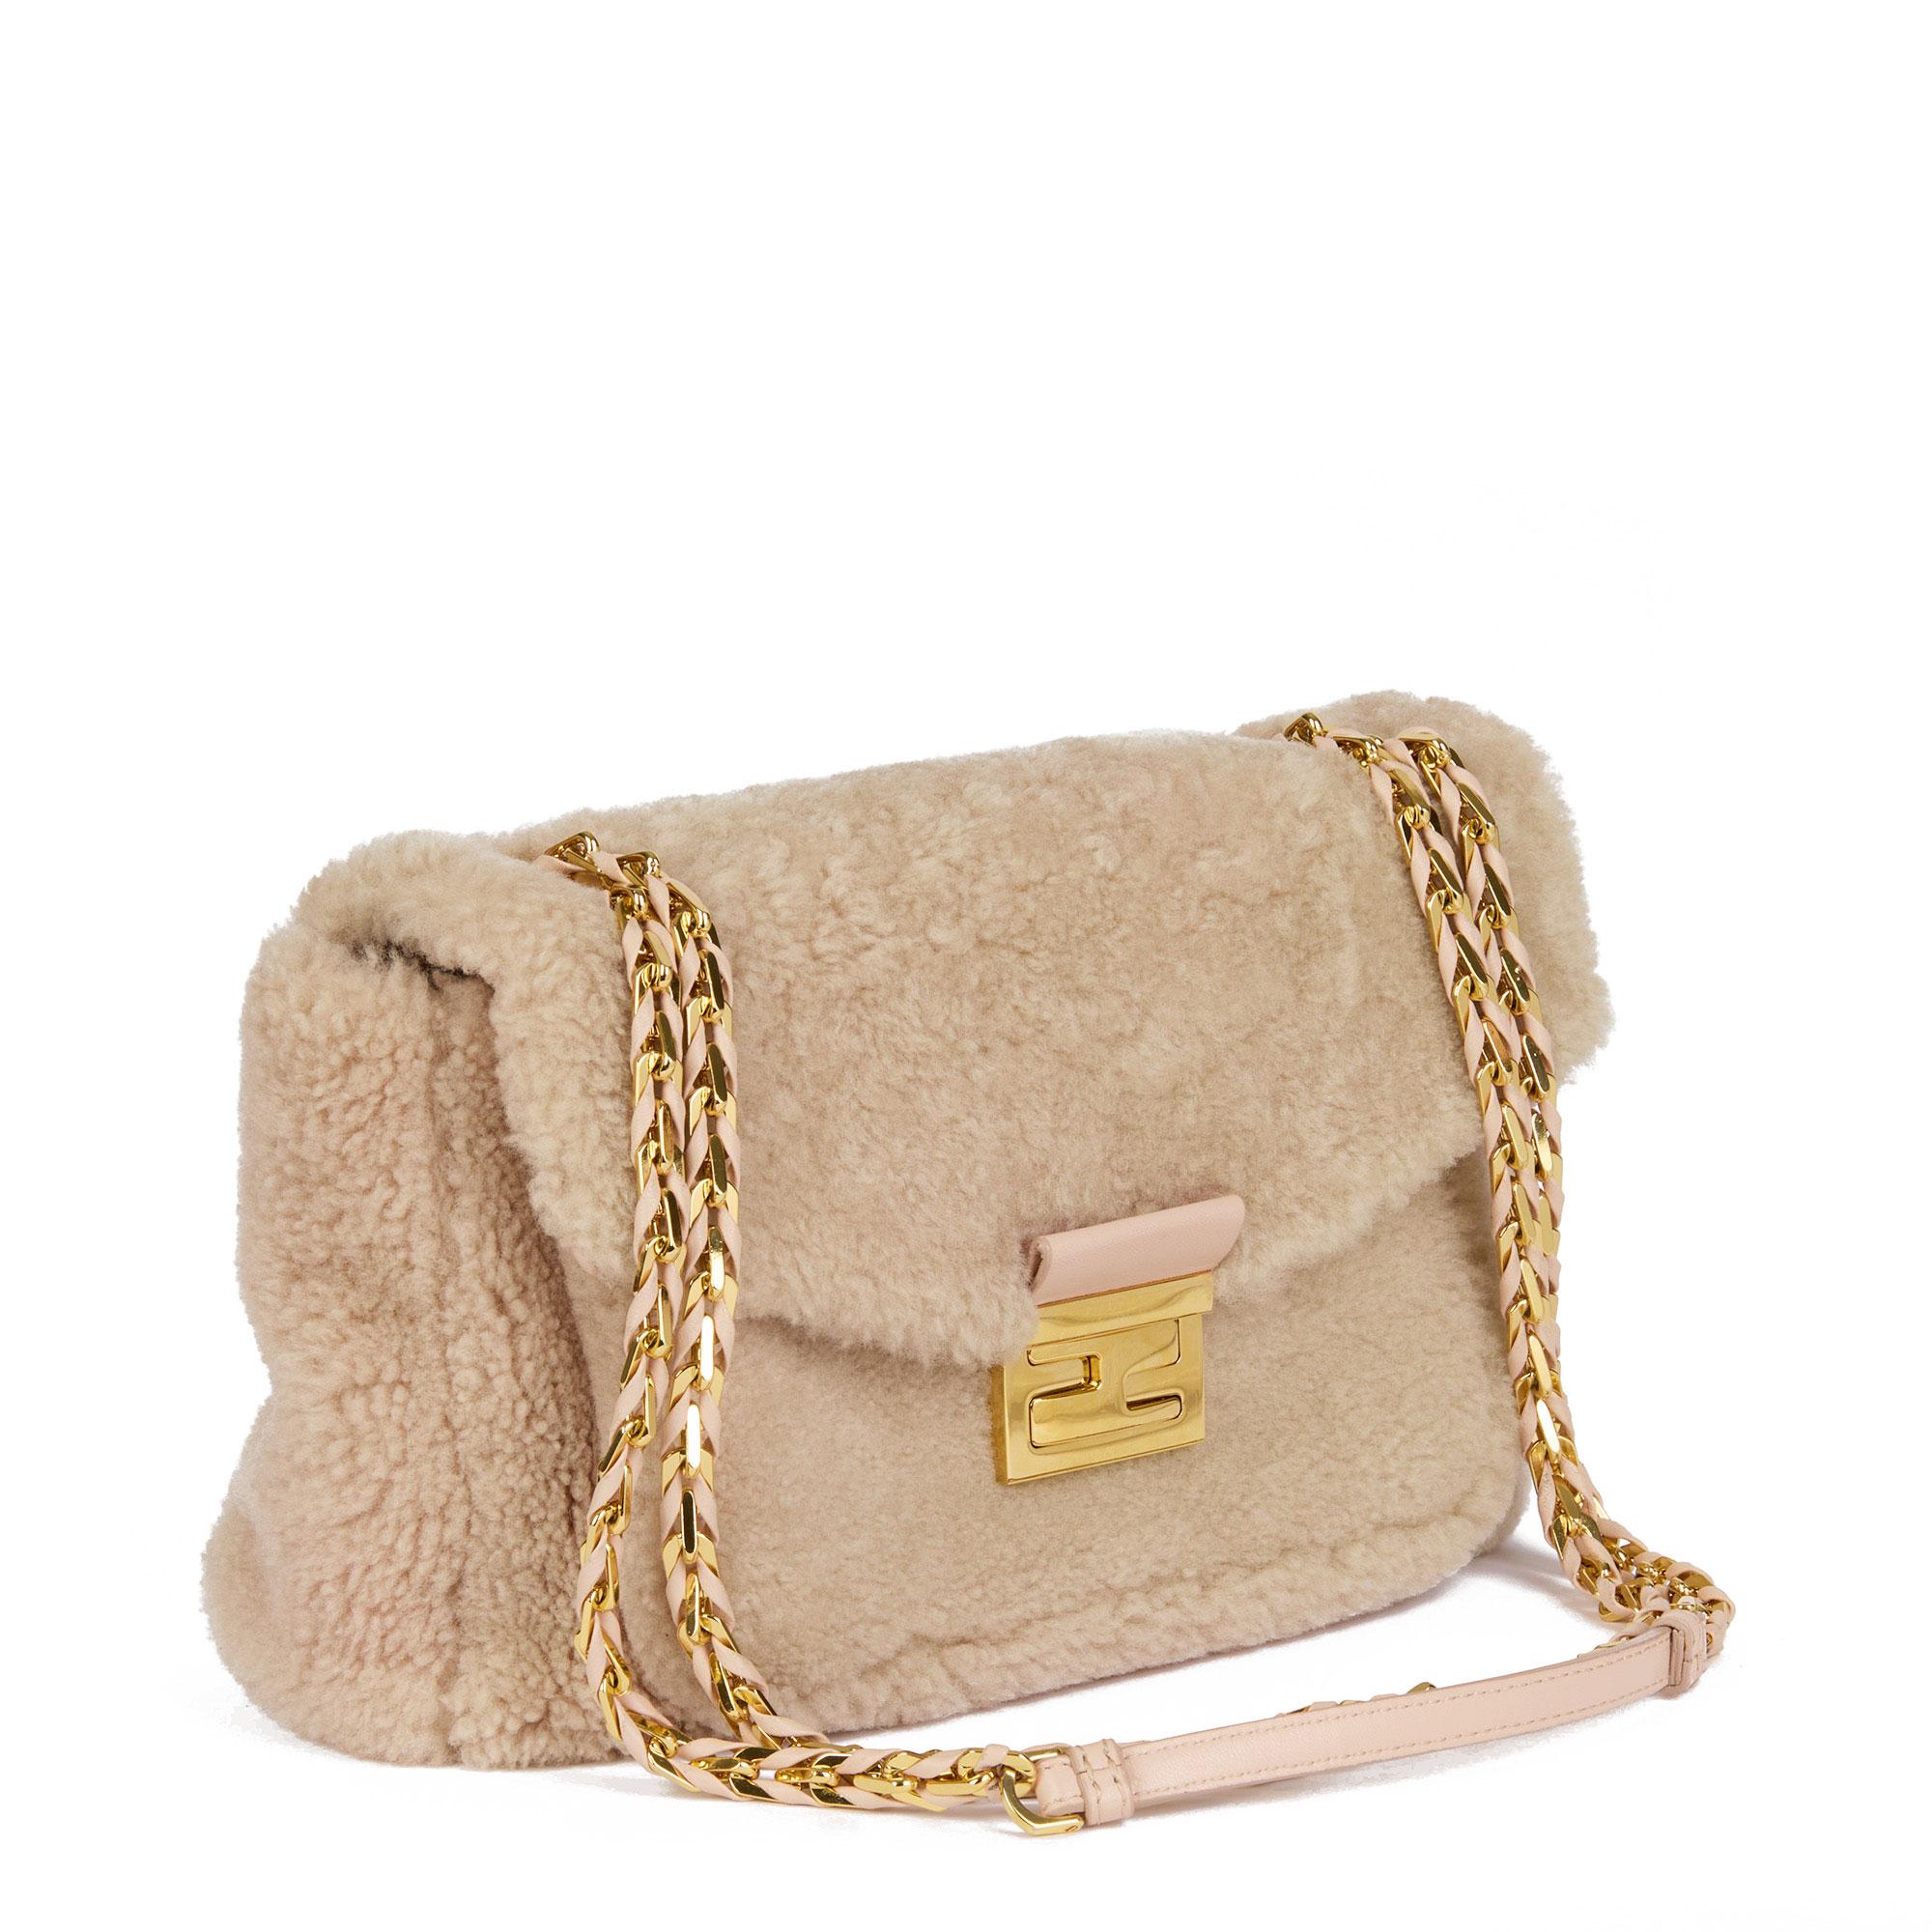 Fendi BEIGE SHEARLING & BLUSH CALFSKIN LEATHER BE BAGUETTE

CONDITION NOTES
This women's Fendi Be Baguette is primarily made from shearling, calfskin leather complemented by gold hardware. This bag is in excellent pre-owned condition. Circa 2010.